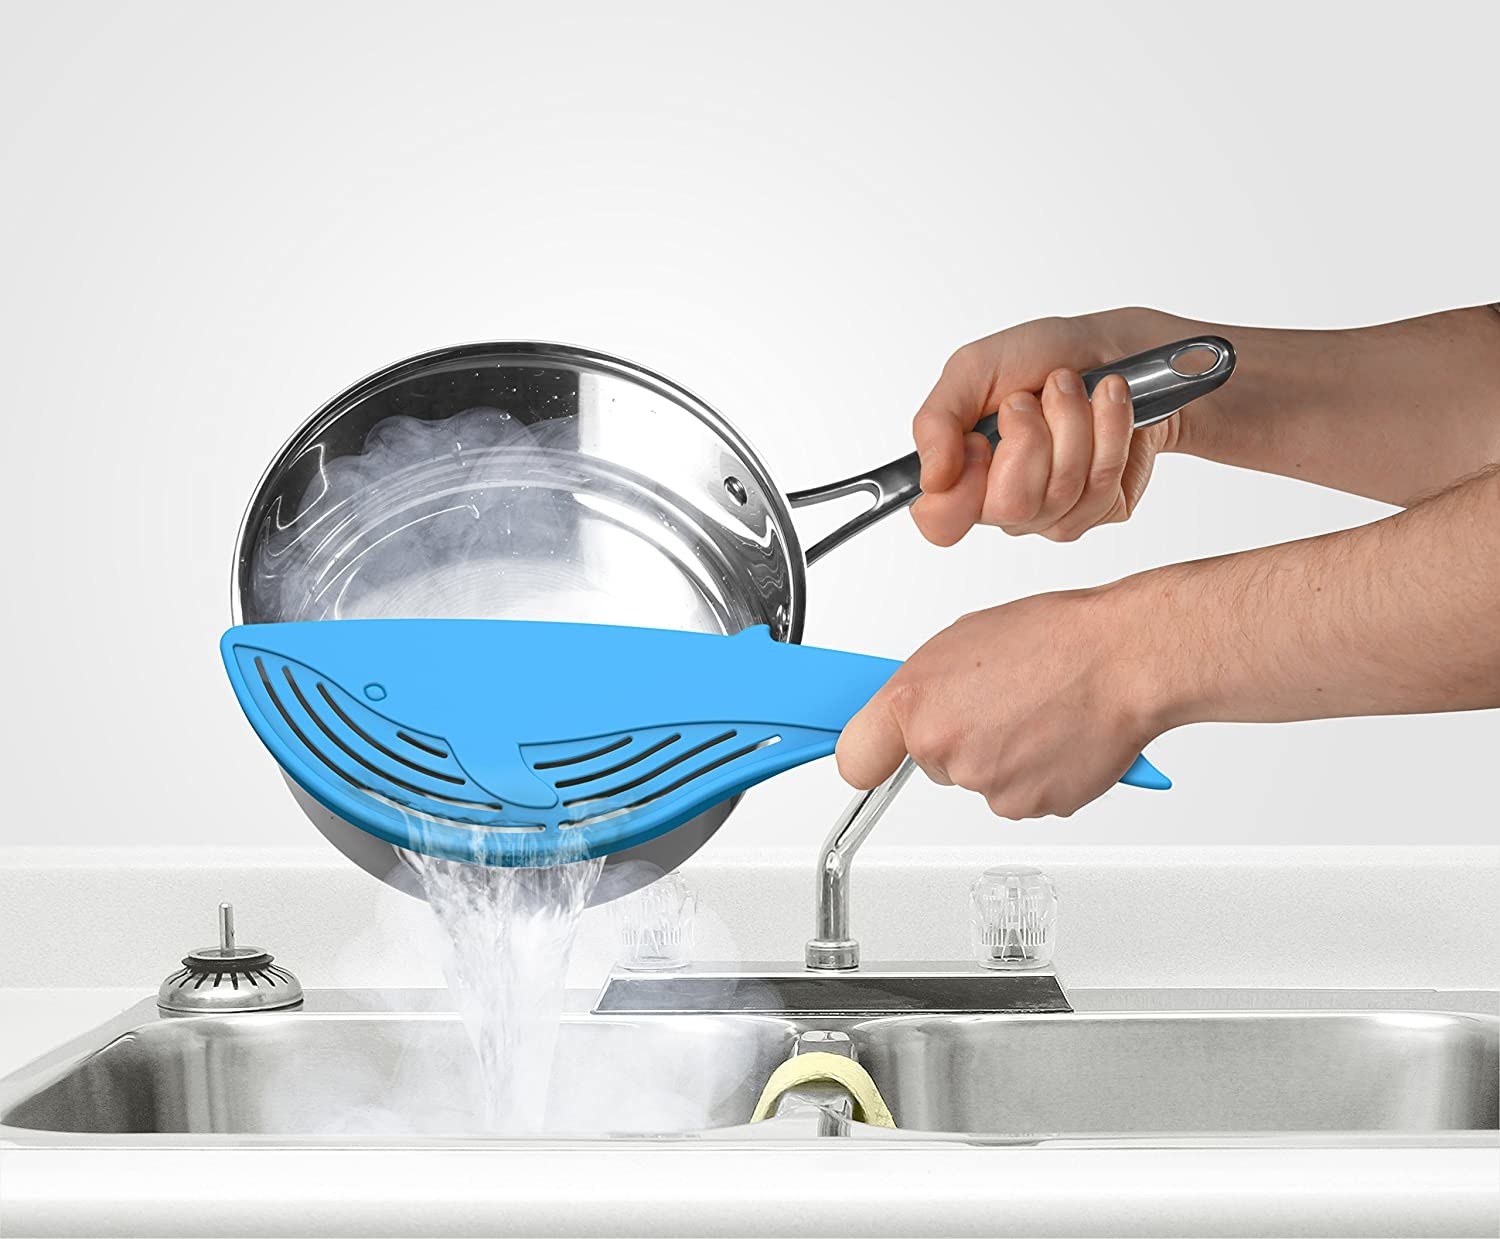 A person uses the whale strainer to drain a pot of scalding water over a stainless steel sink